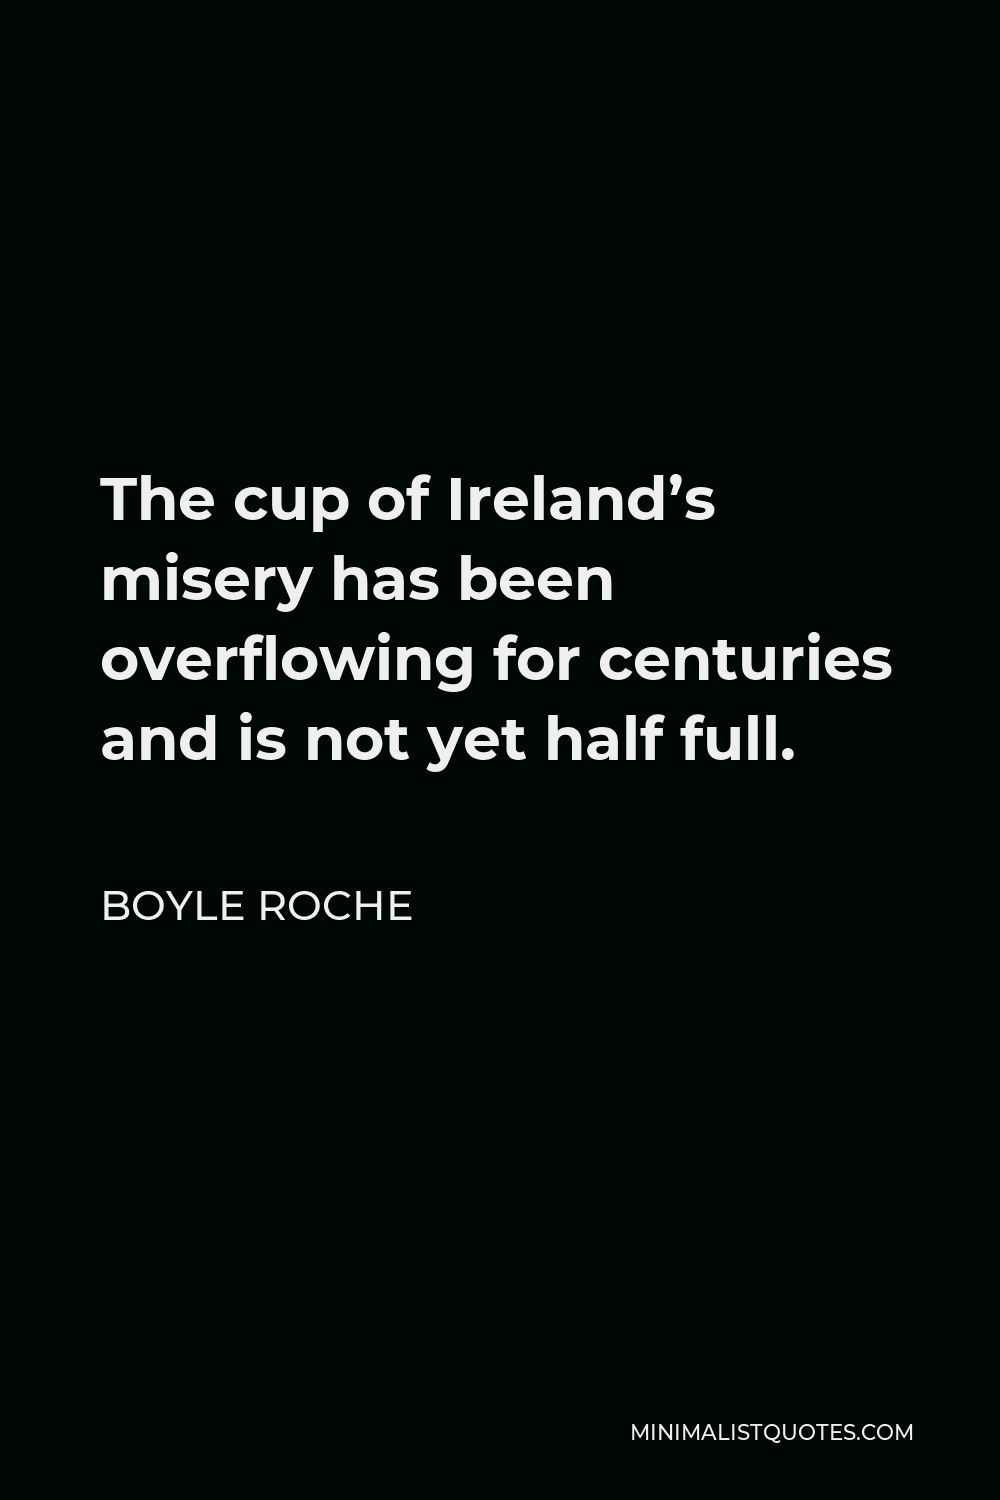 Boyle Roche Quote - The cup of Ireland’s misery has been overflowing for centuries and is not yet half full.